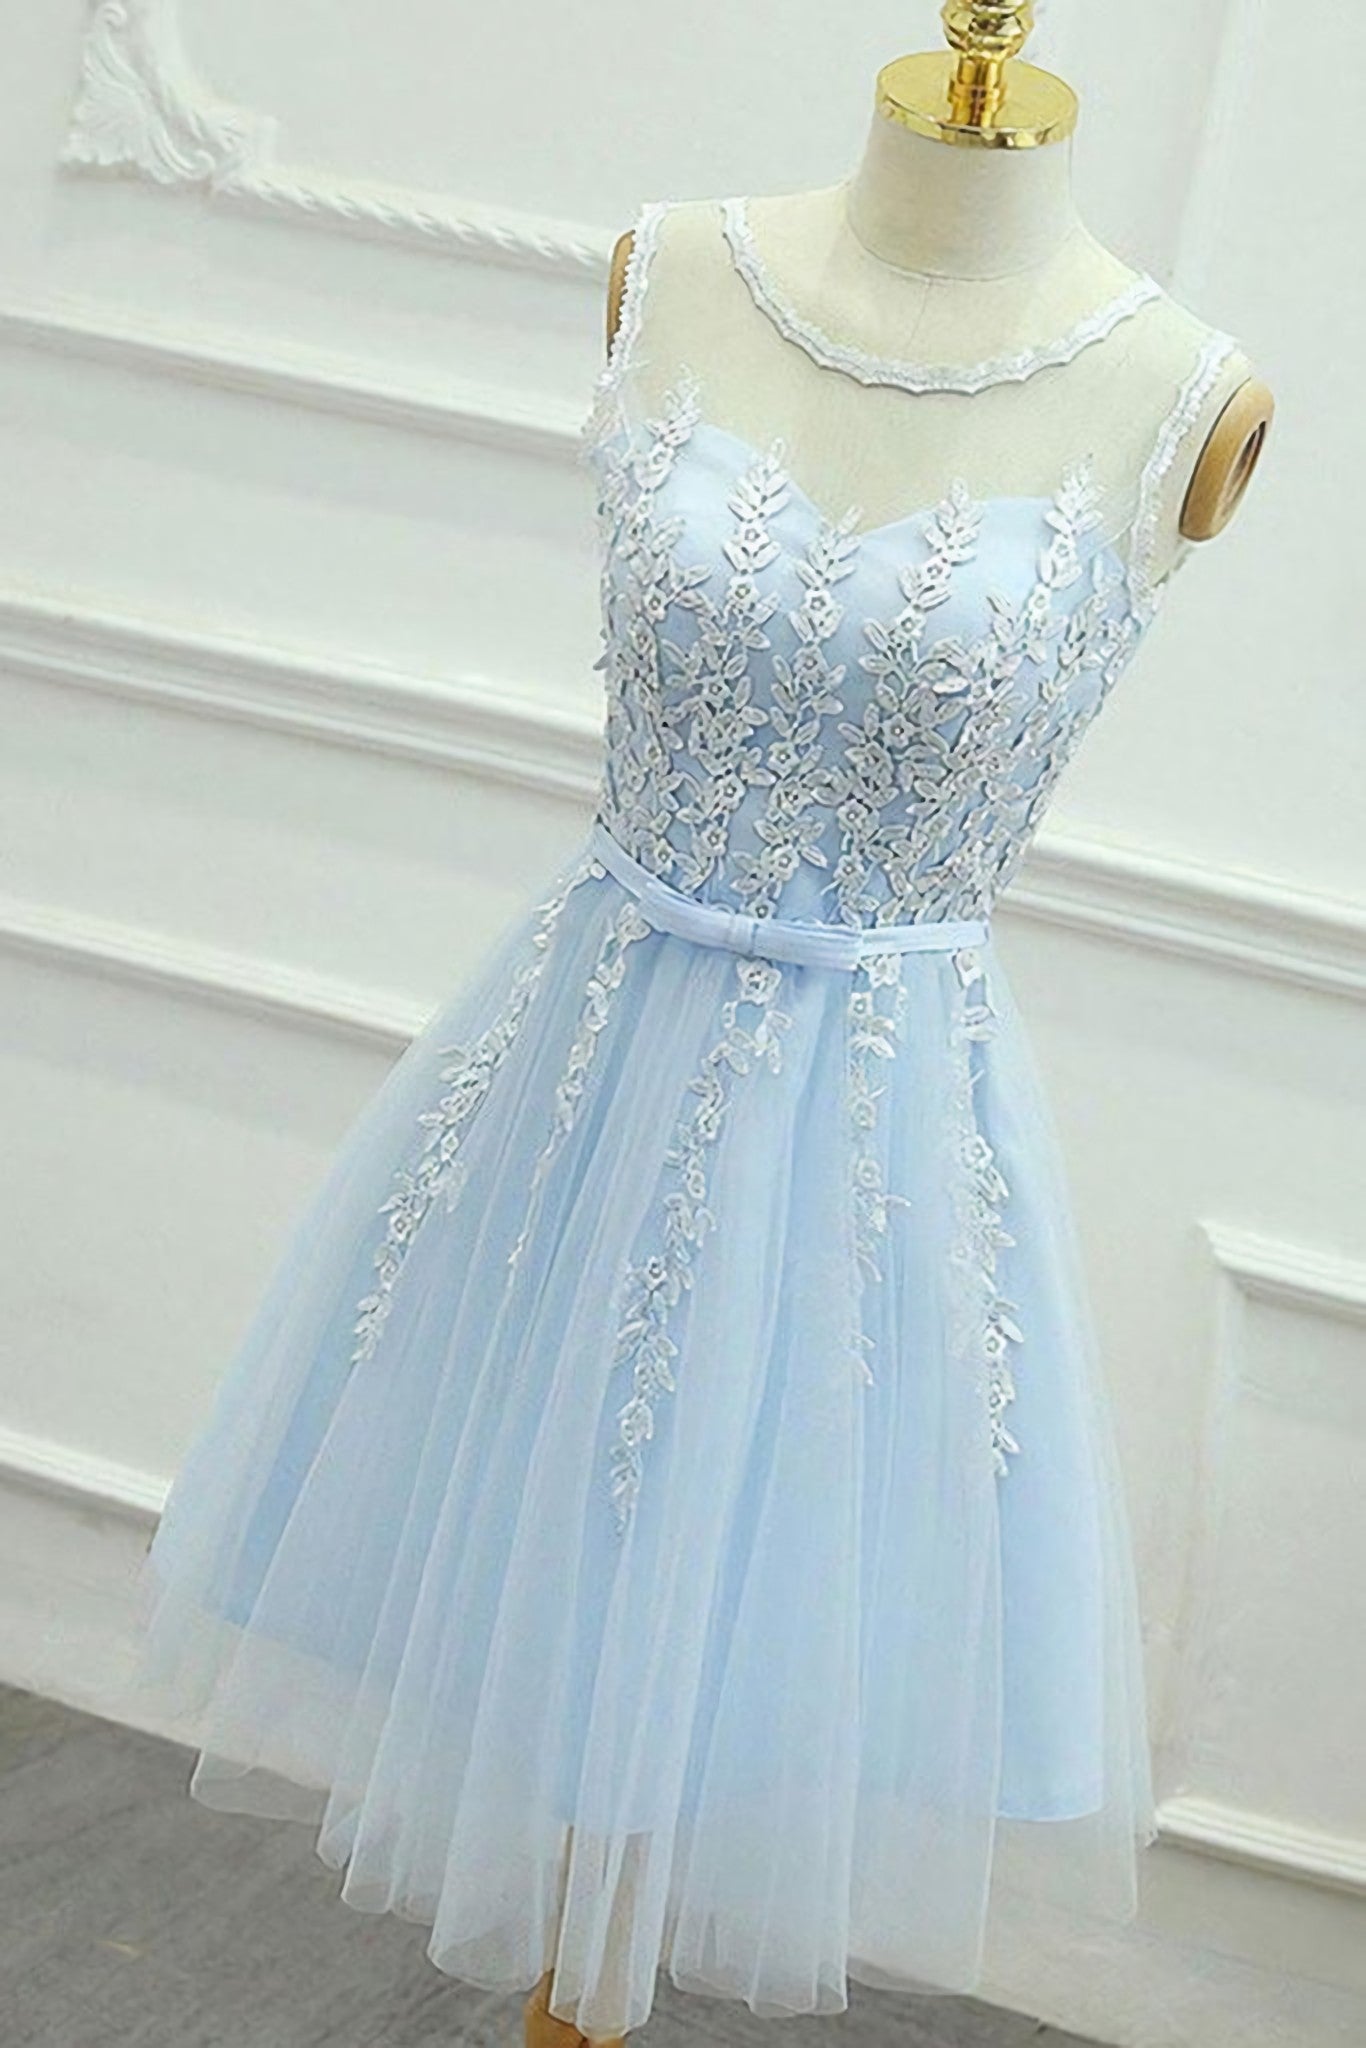 Short Blue Lace Corset Formal Graduation Corset Homecoming Dress outfit, Prom Dresses 2030 Fashion Outfit